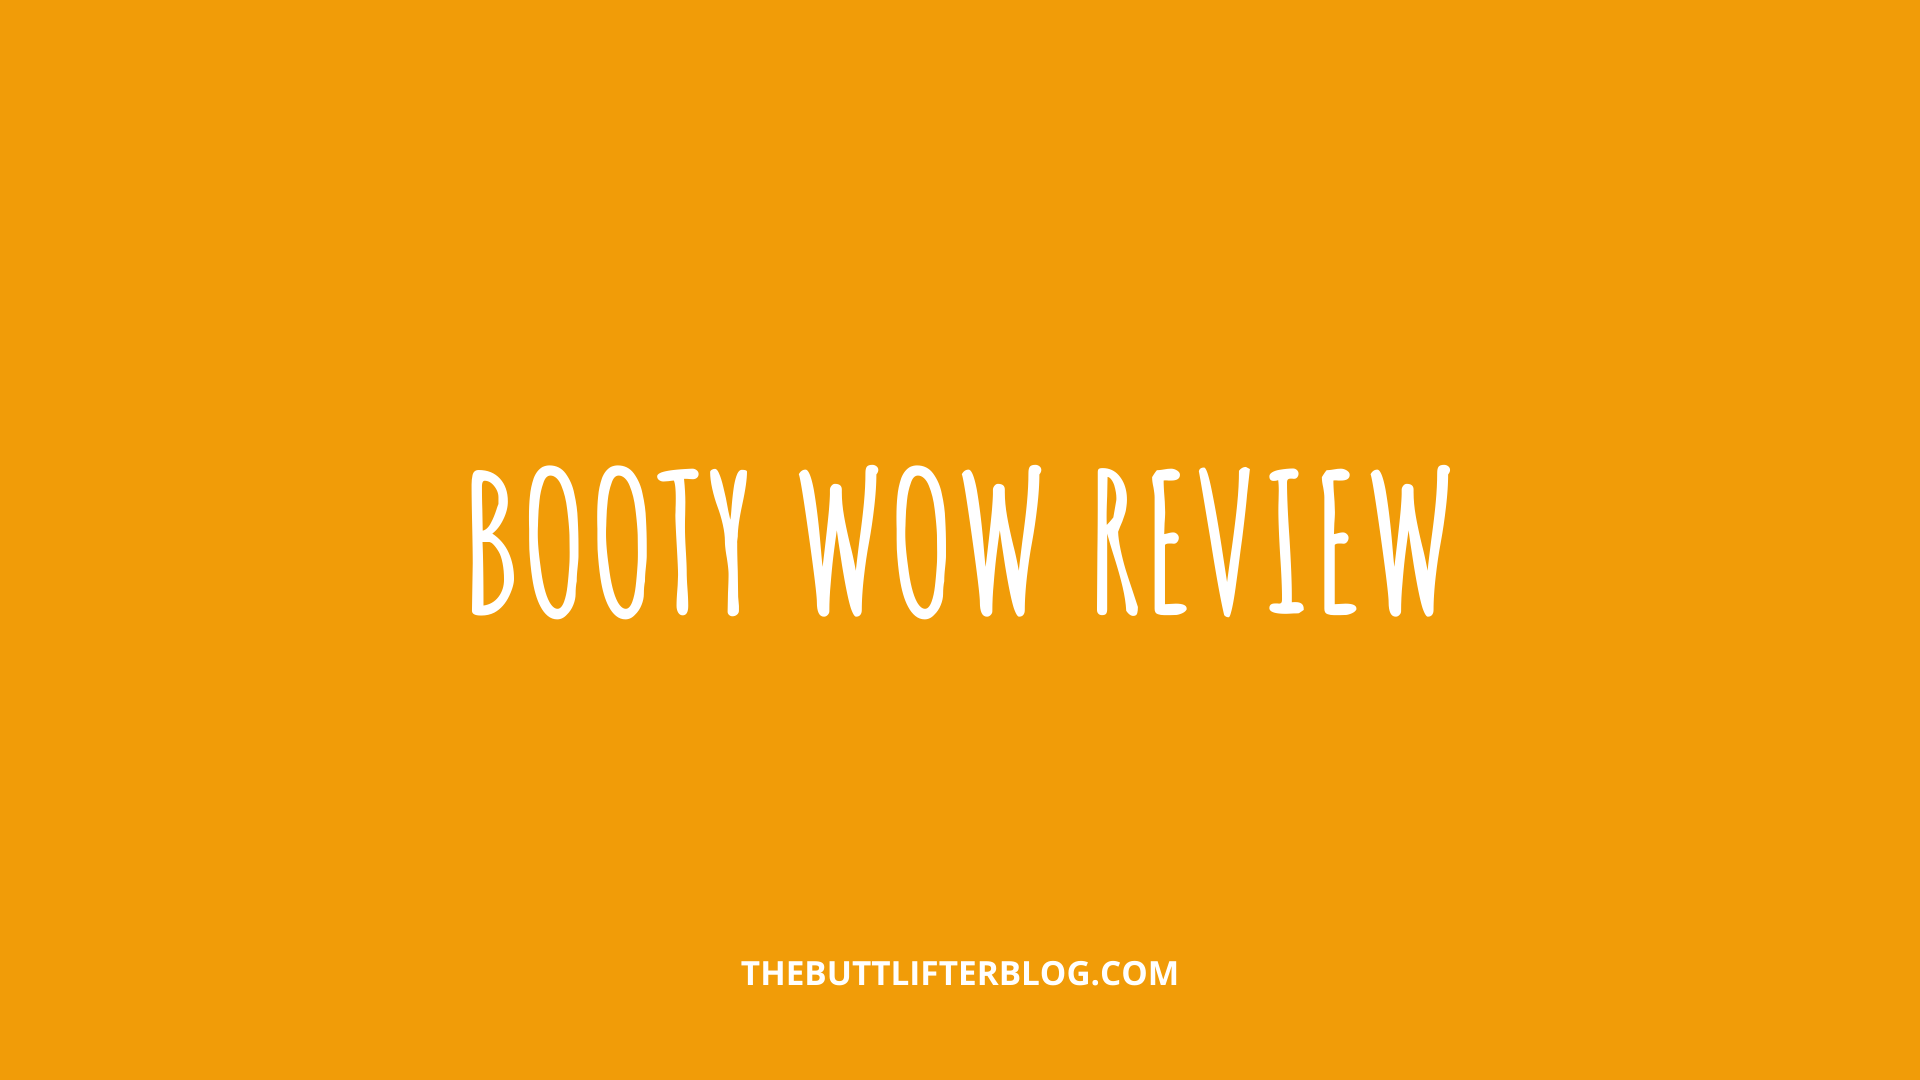 Booty Wow Review: READ THIS BEFORE BUYING!